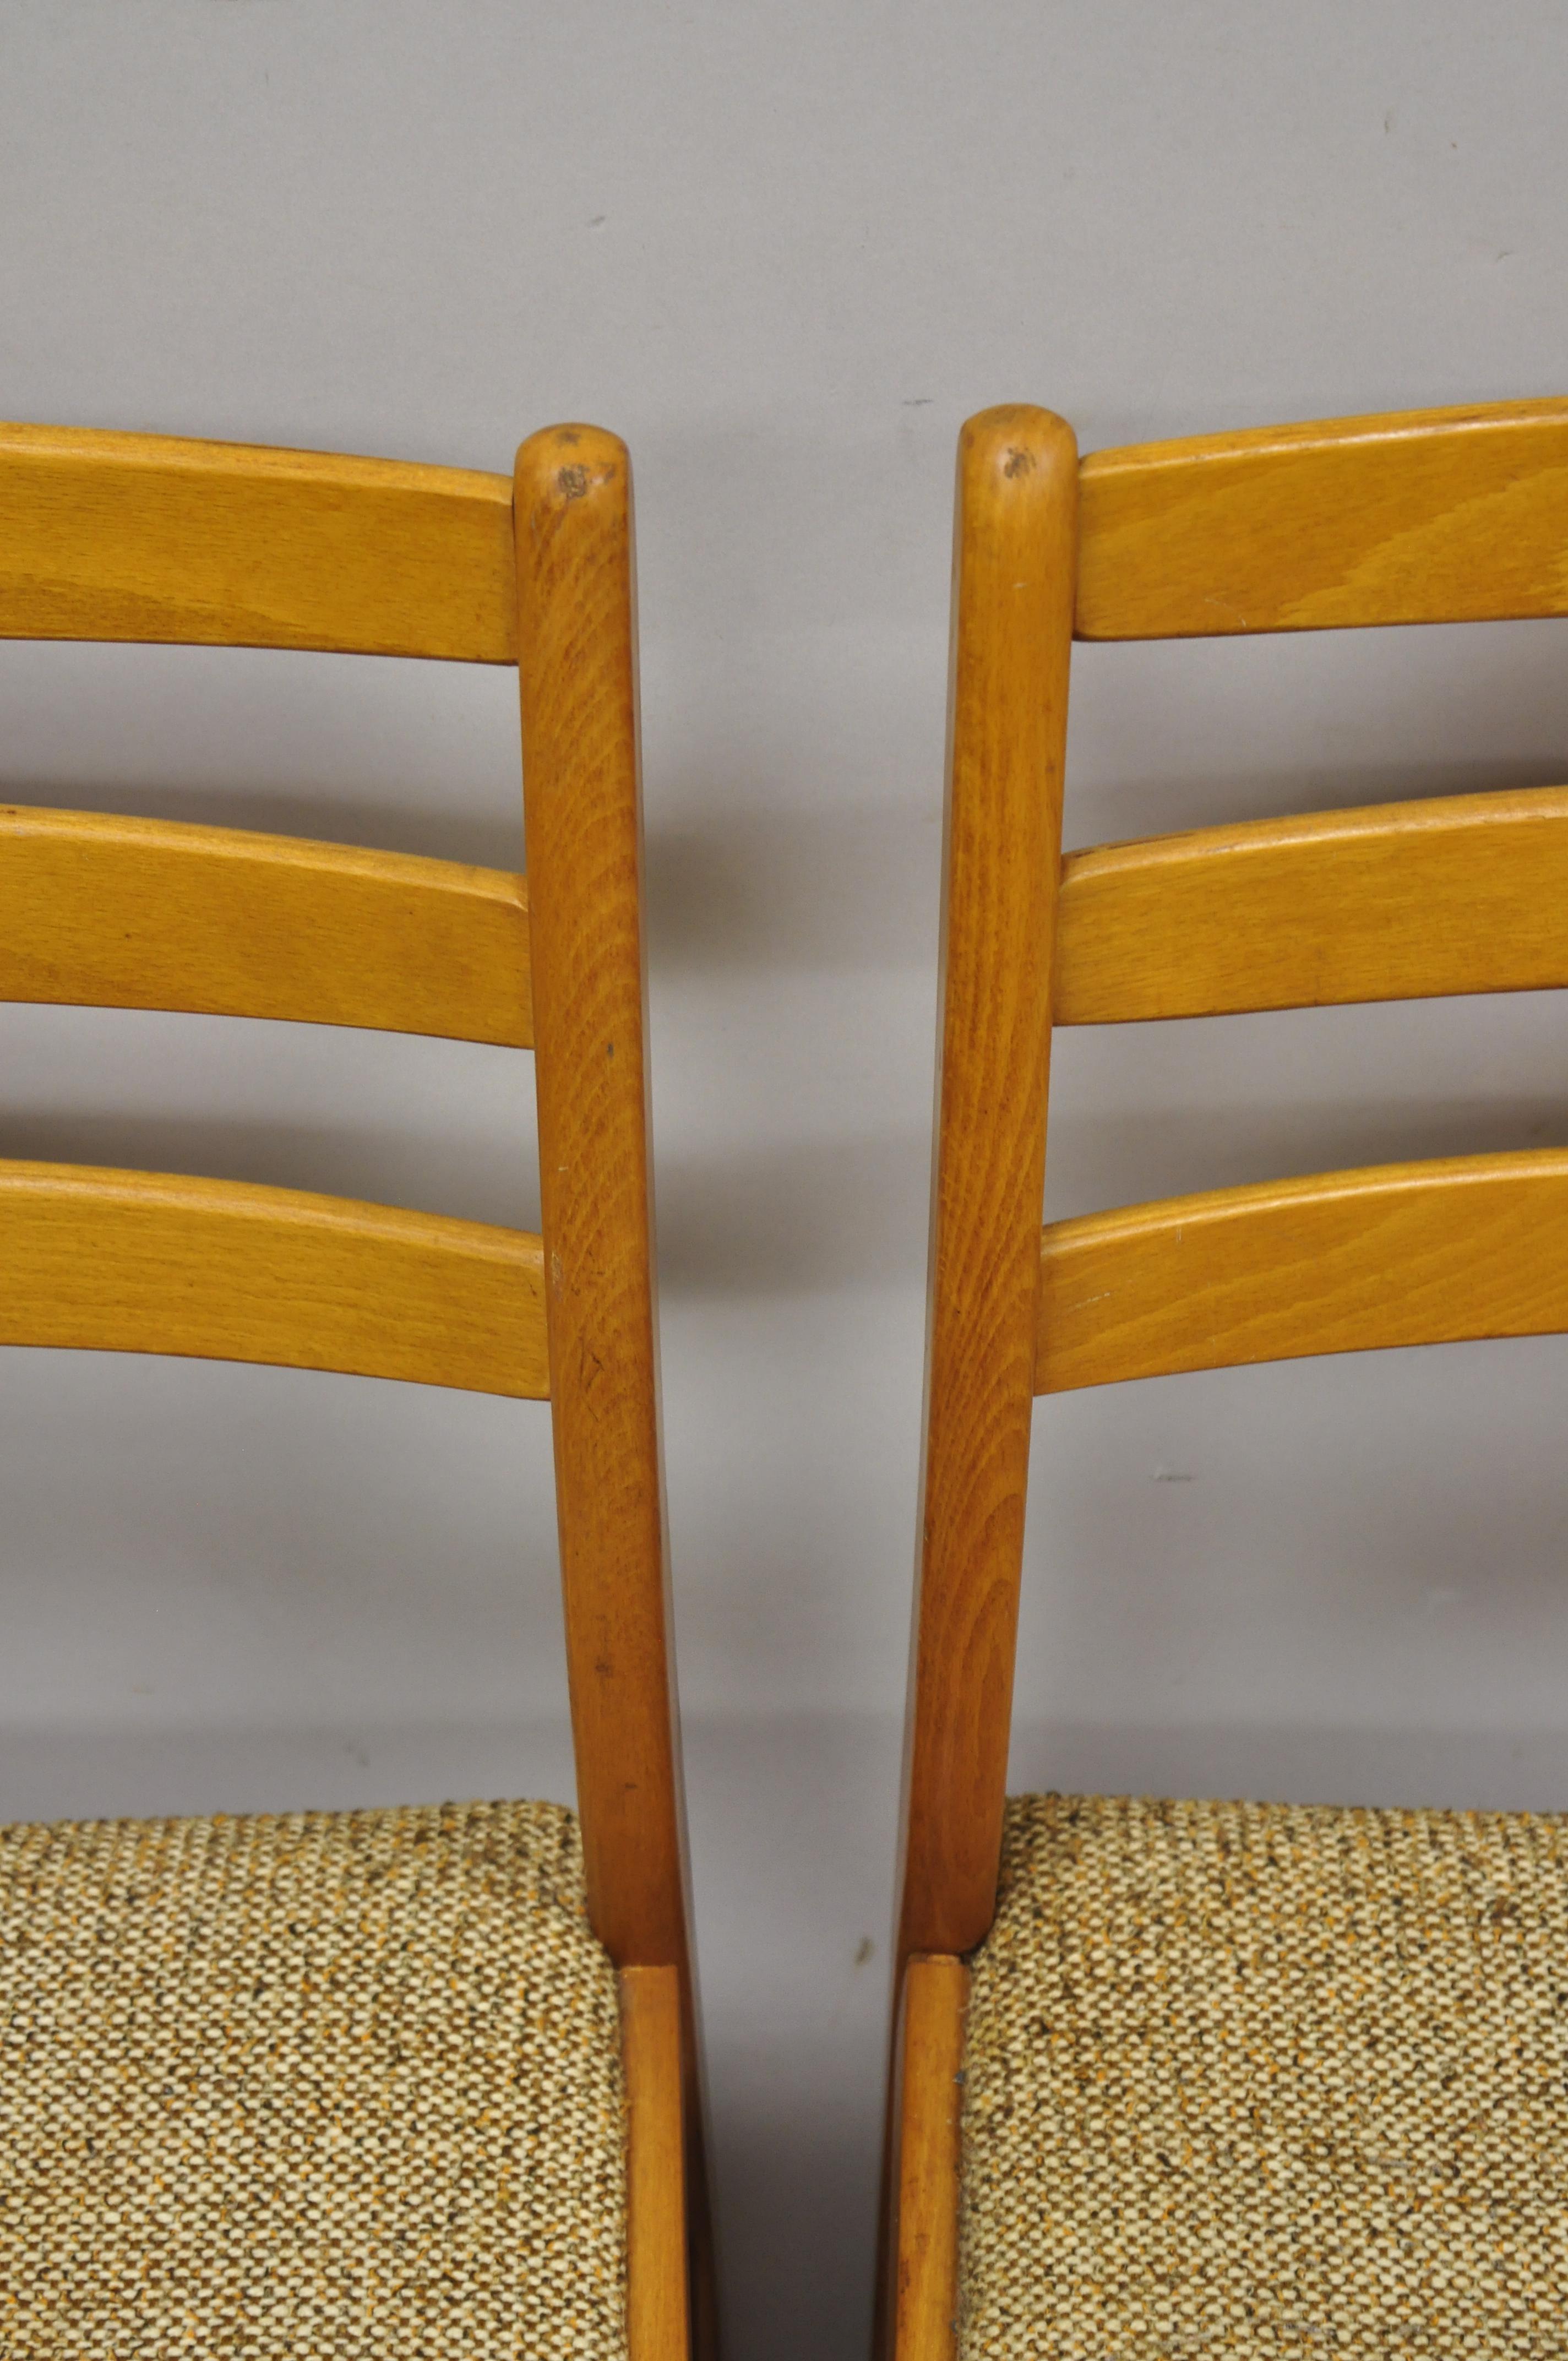 Vintage Midcentury Danish Modern Teak Ladderback Dining Room Chairs, Set of 4 In Good Condition For Sale In Philadelphia, PA